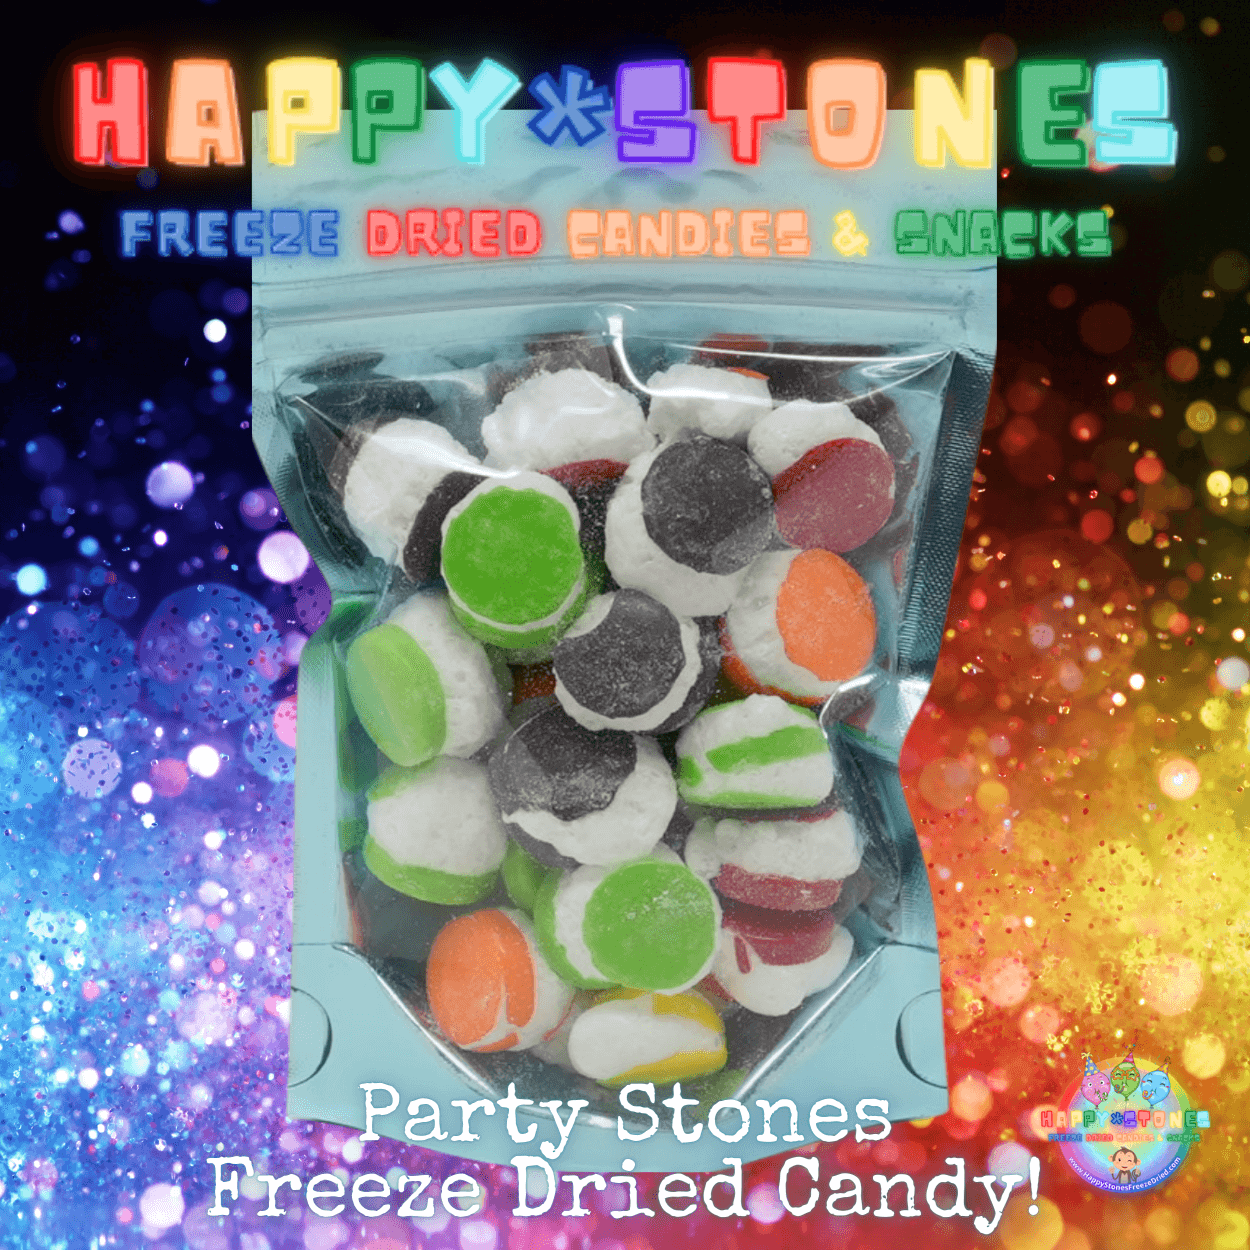 Freeze Dried Candy Shop Party Stones Best Freeze Dried Candy Website Buy TikTok Candy